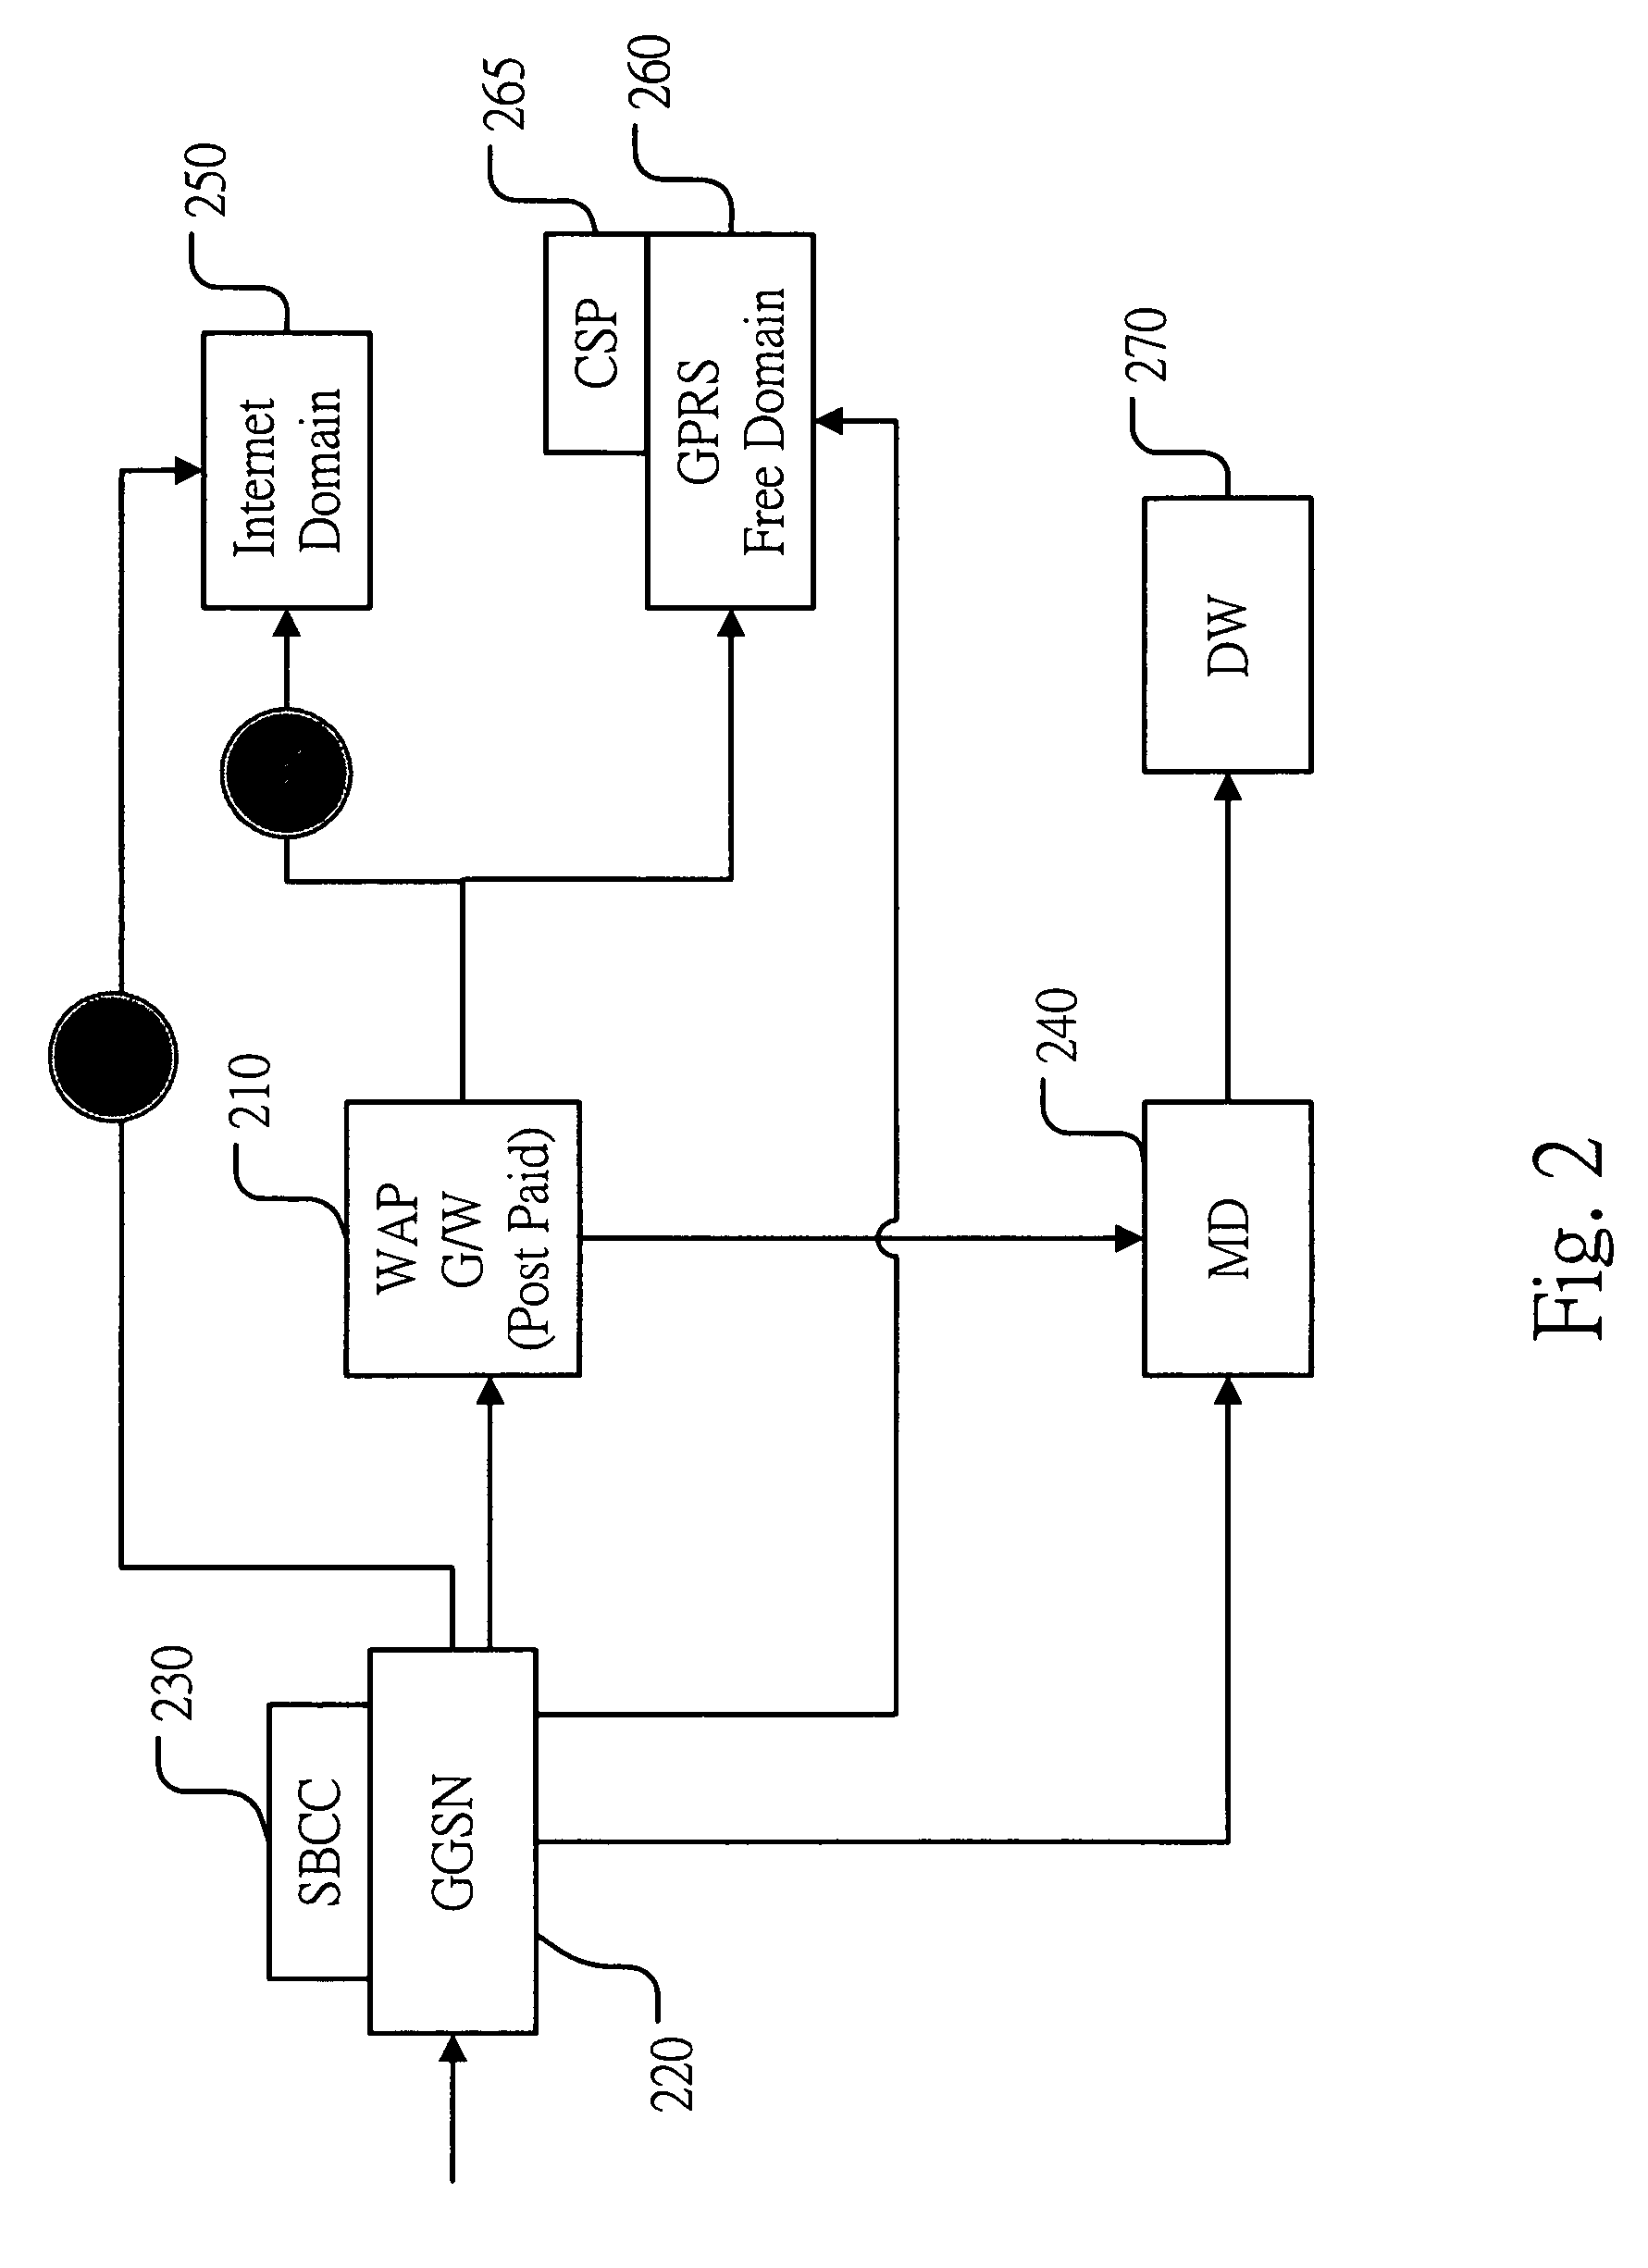 Mobile network content based charging and access control system